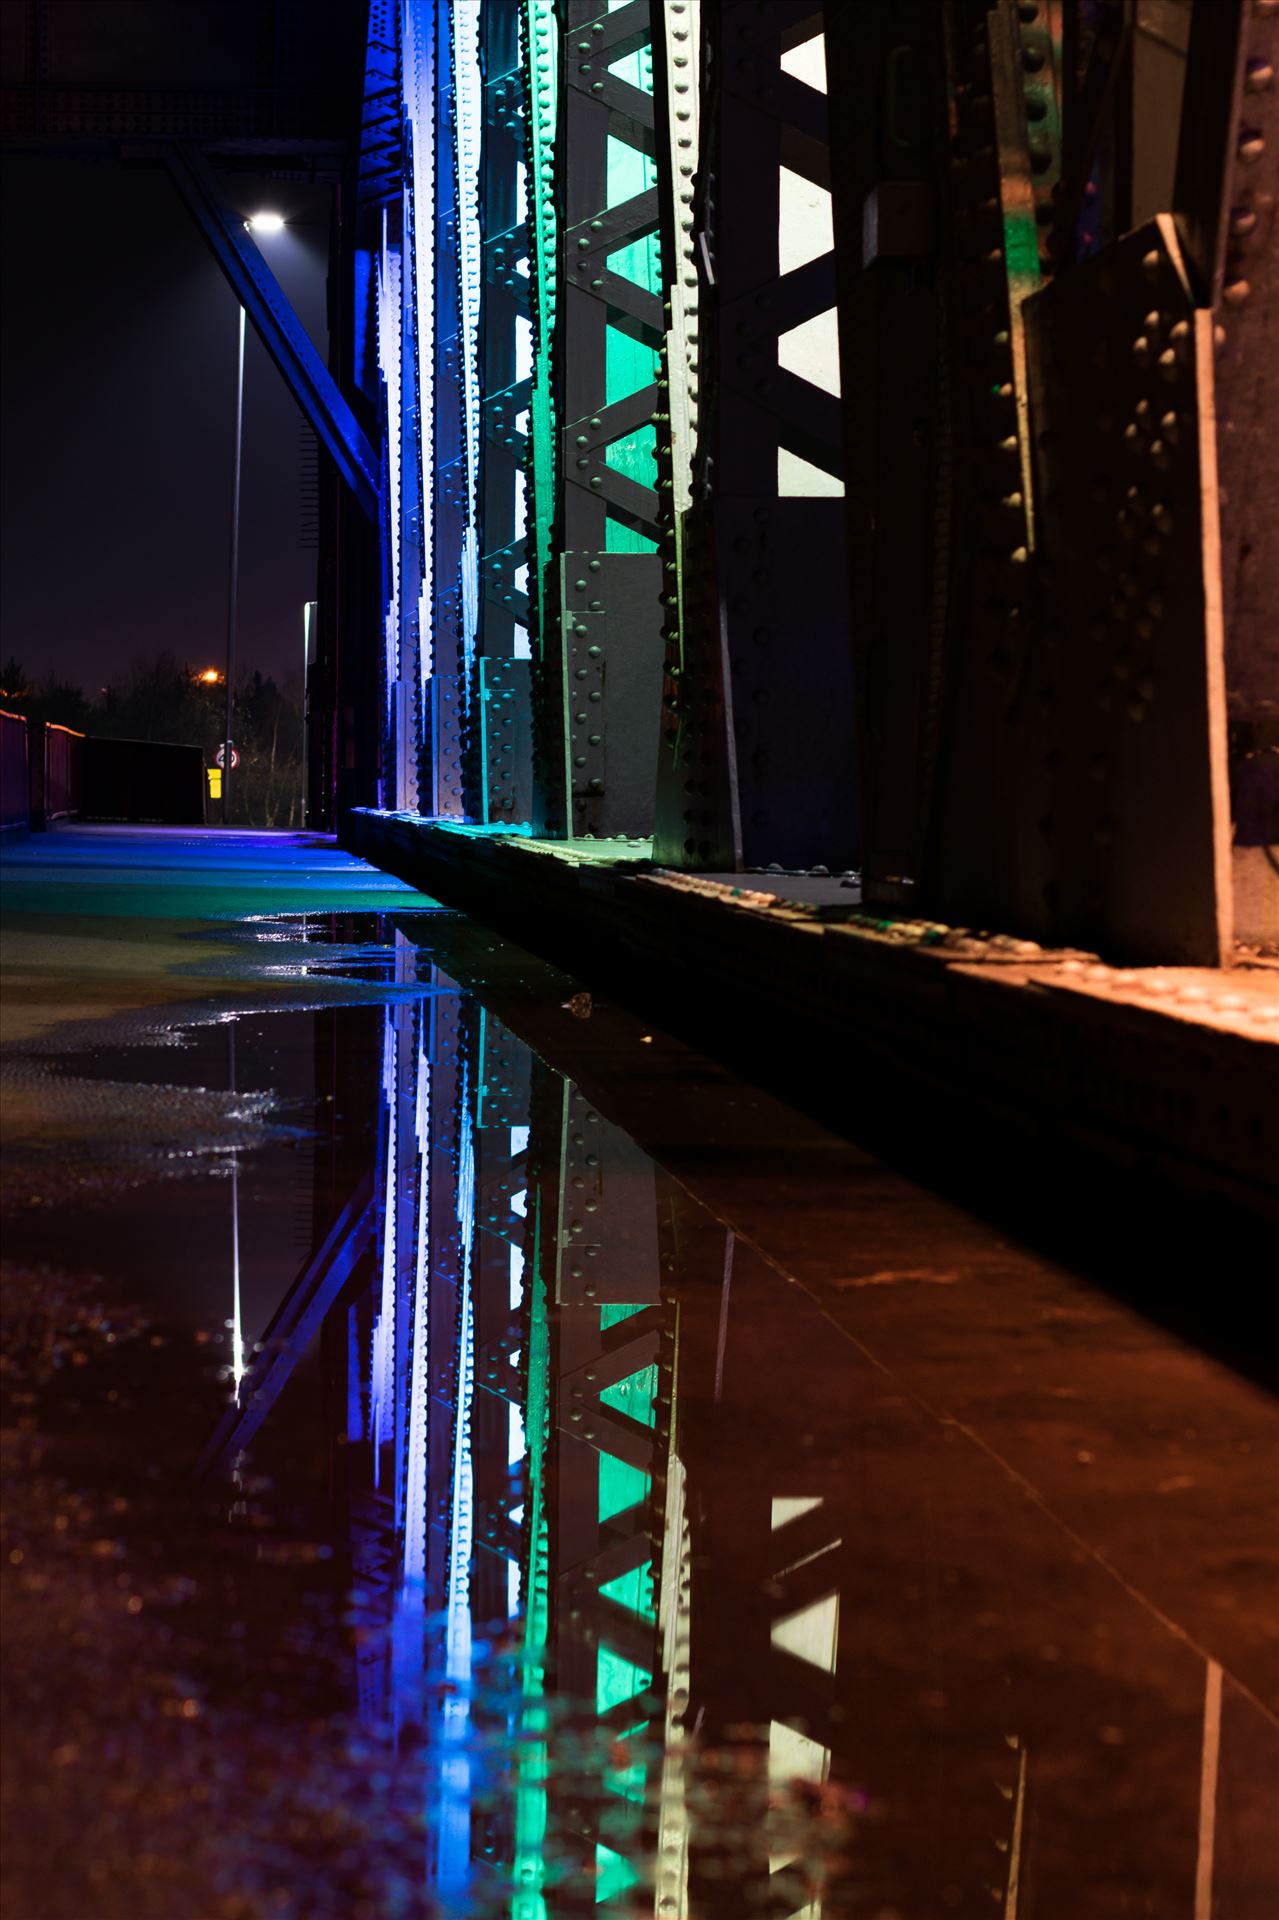 Newport Bridge Rainbow Lights Puddle Refrlection A photo of the lights on Newport Bridge and a puddle reflection. by AJ Stoves Photography